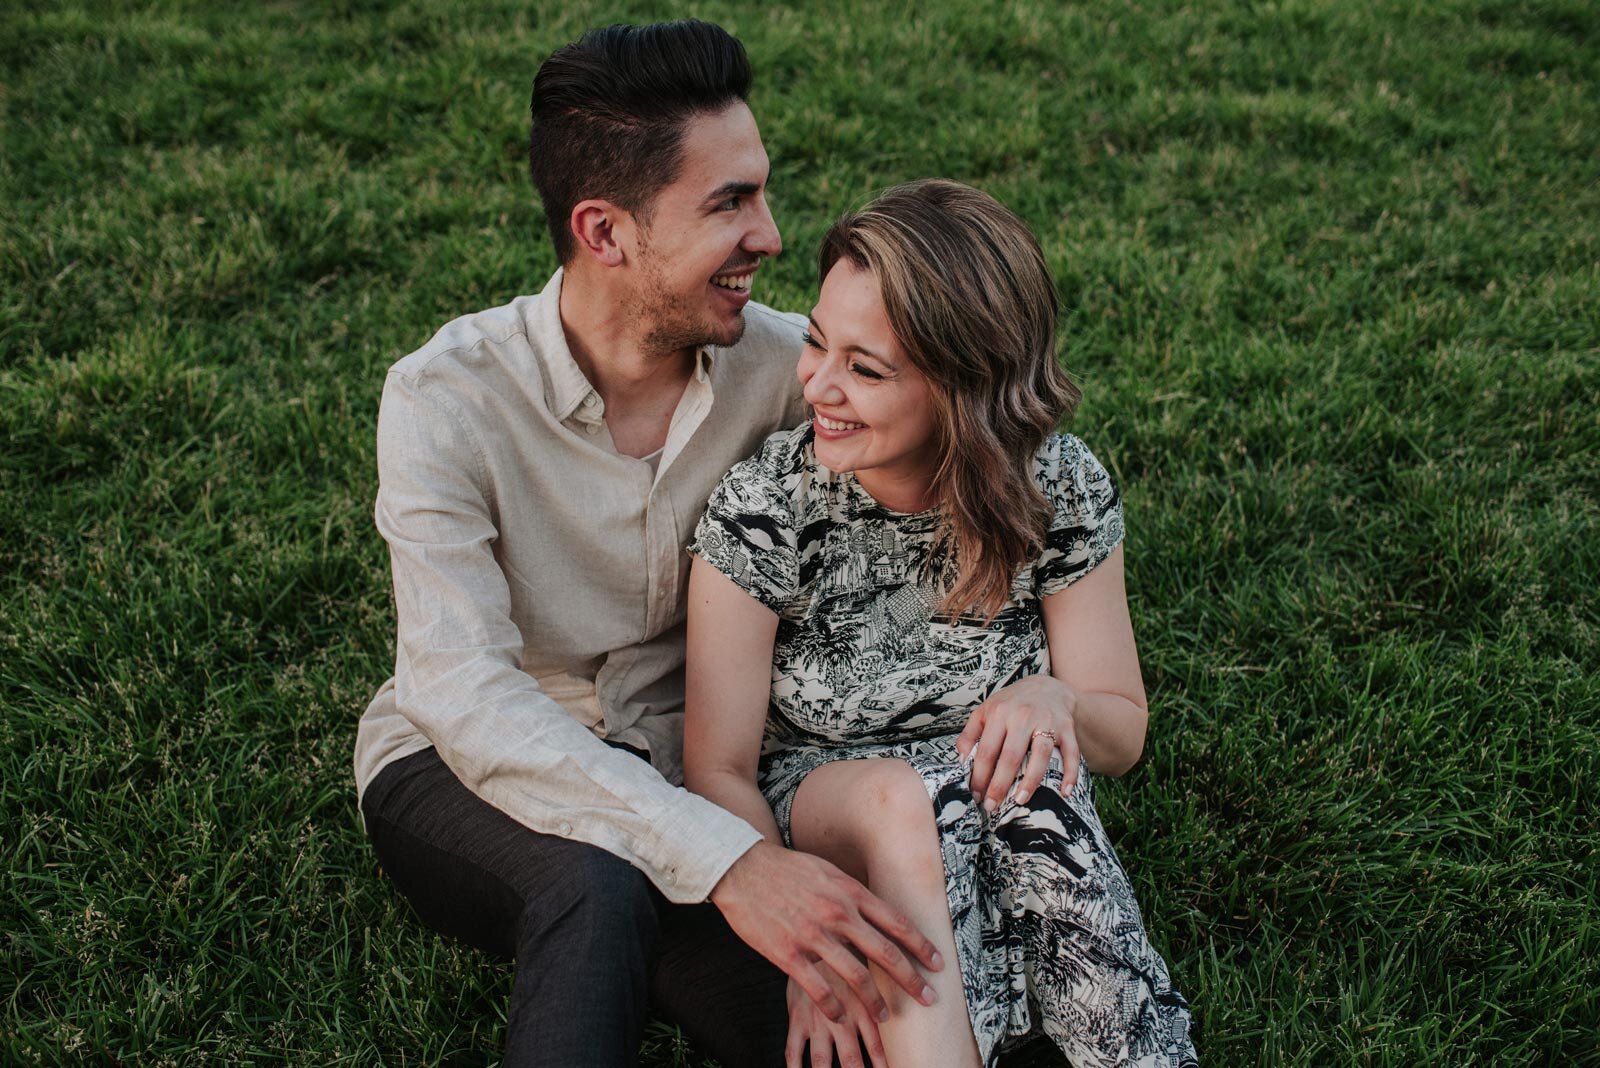 Betrothed couple sitting together in lush grass field in Richmond VA Carly Romeo and Co. (Copy)